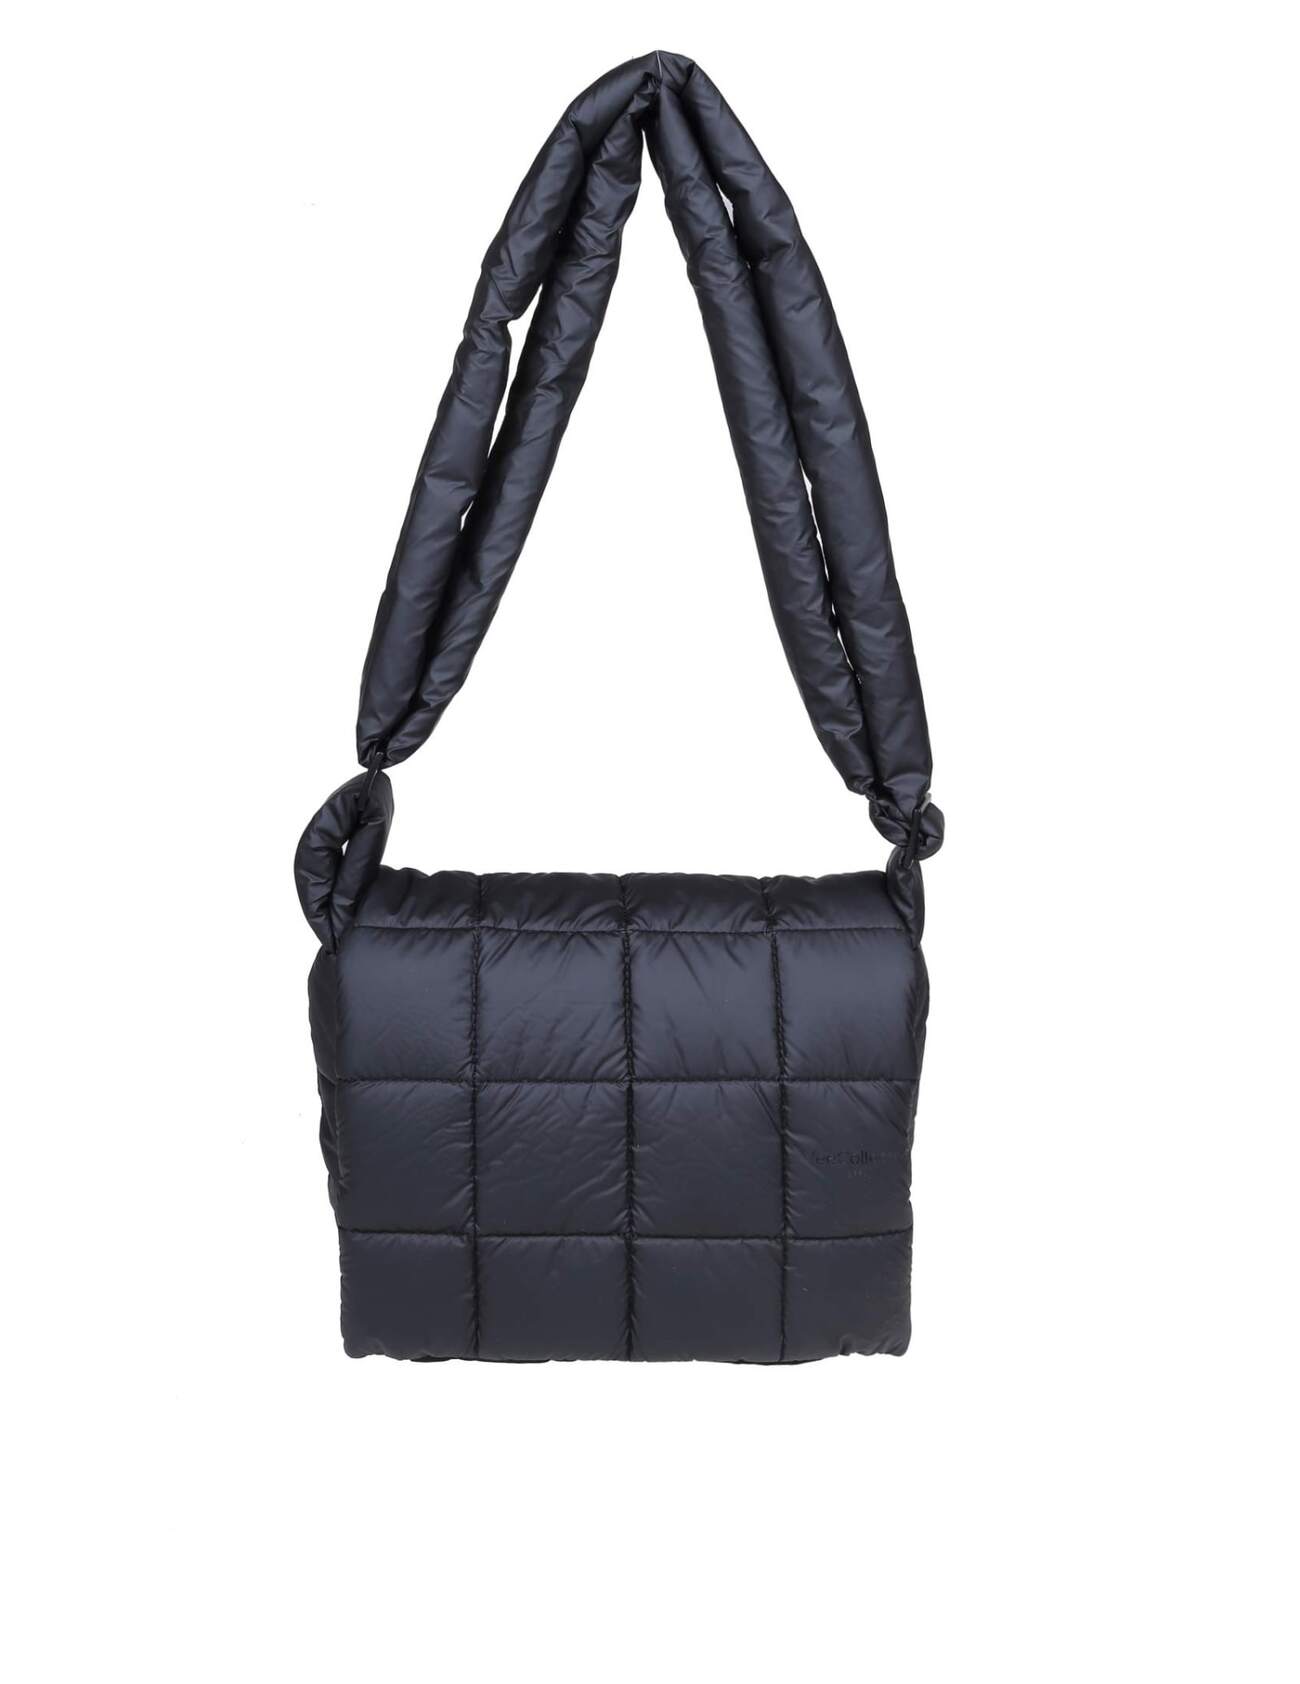 VeeCollective Collective Messenger Vee Bag With Quilted Fabric in black